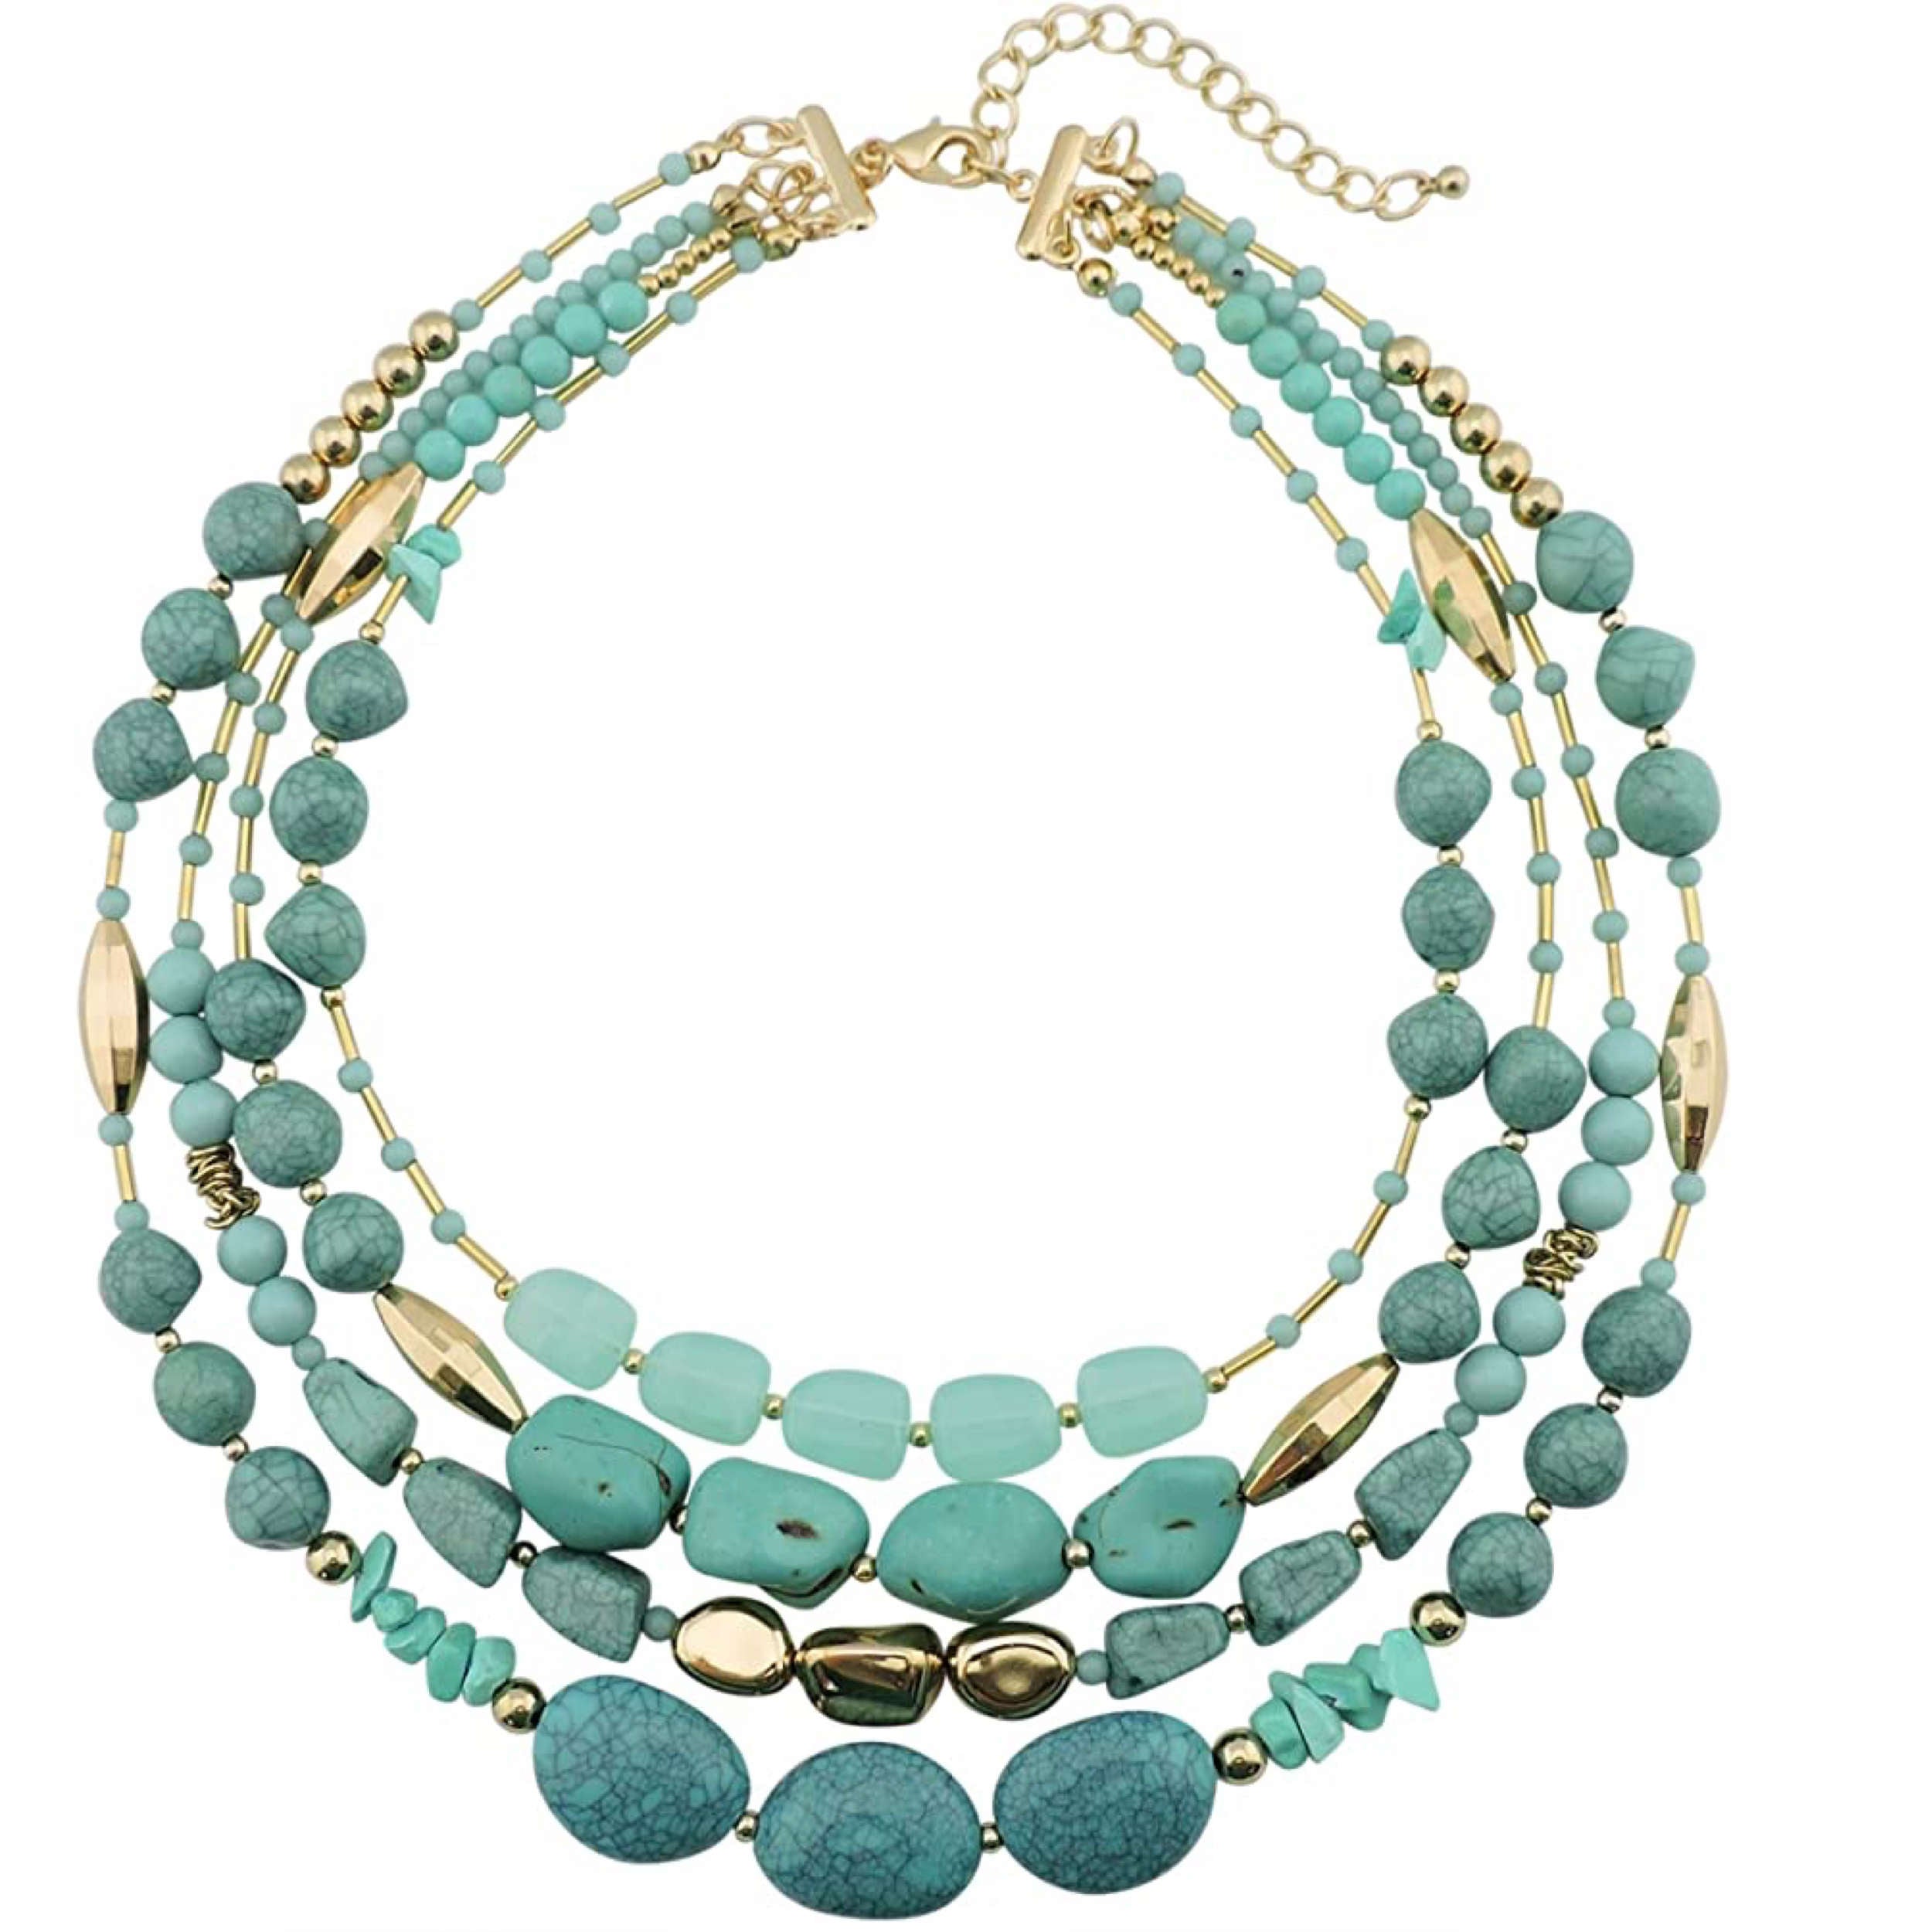 Big Turquoise statement necklace and earrings | Green Horse Organics